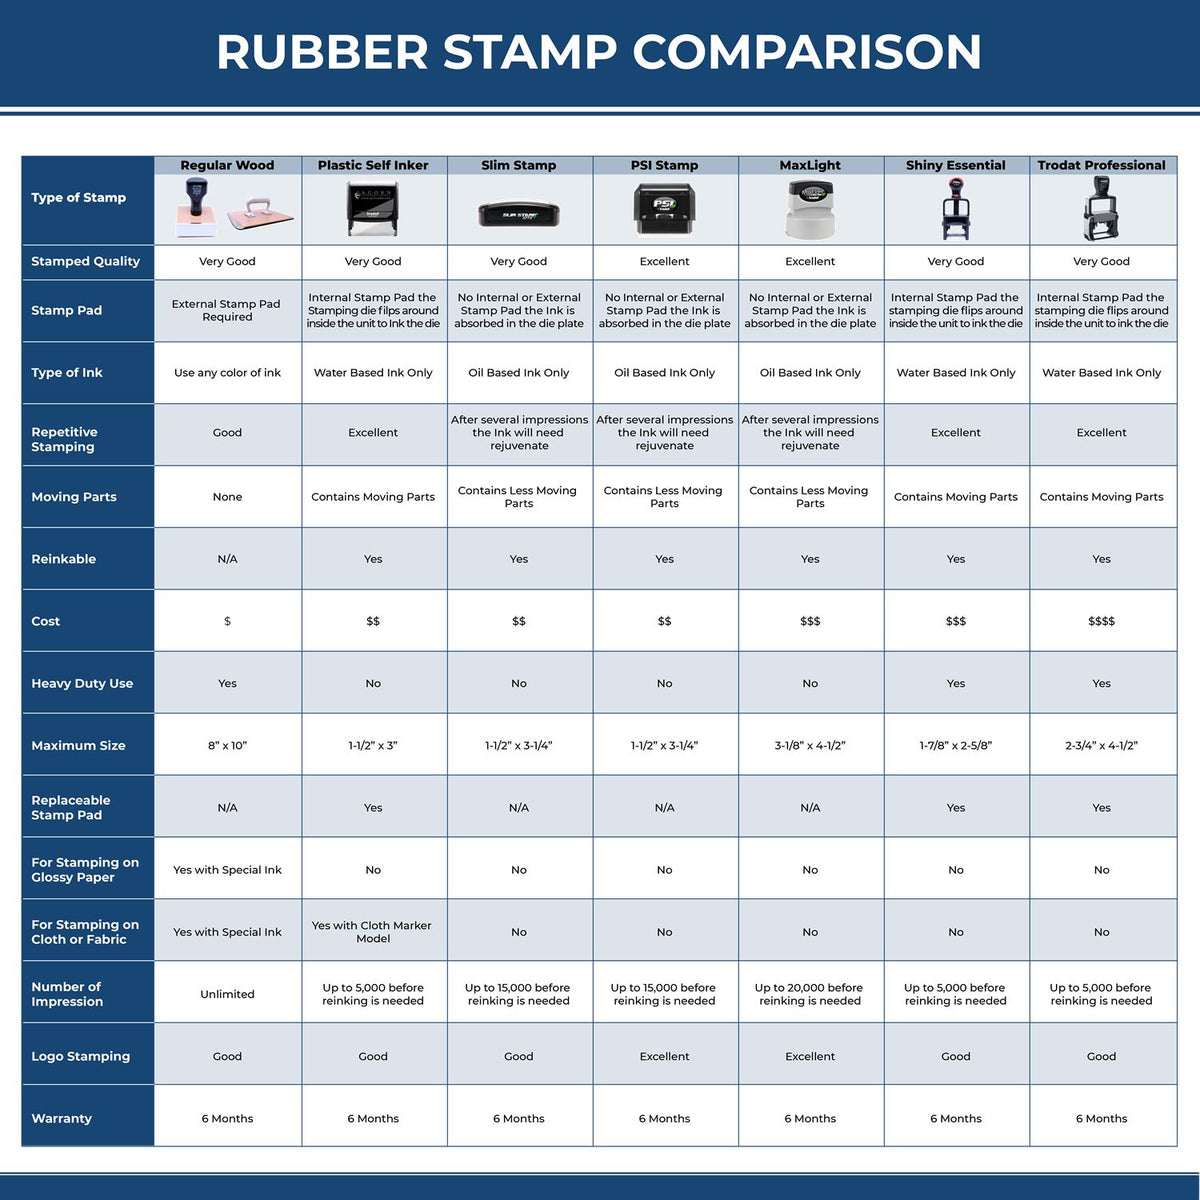 A comparison chart for the different types of mount models available for the MaxLight Premium Pre-Inked Kentucky State Seal Notarial Stamp.